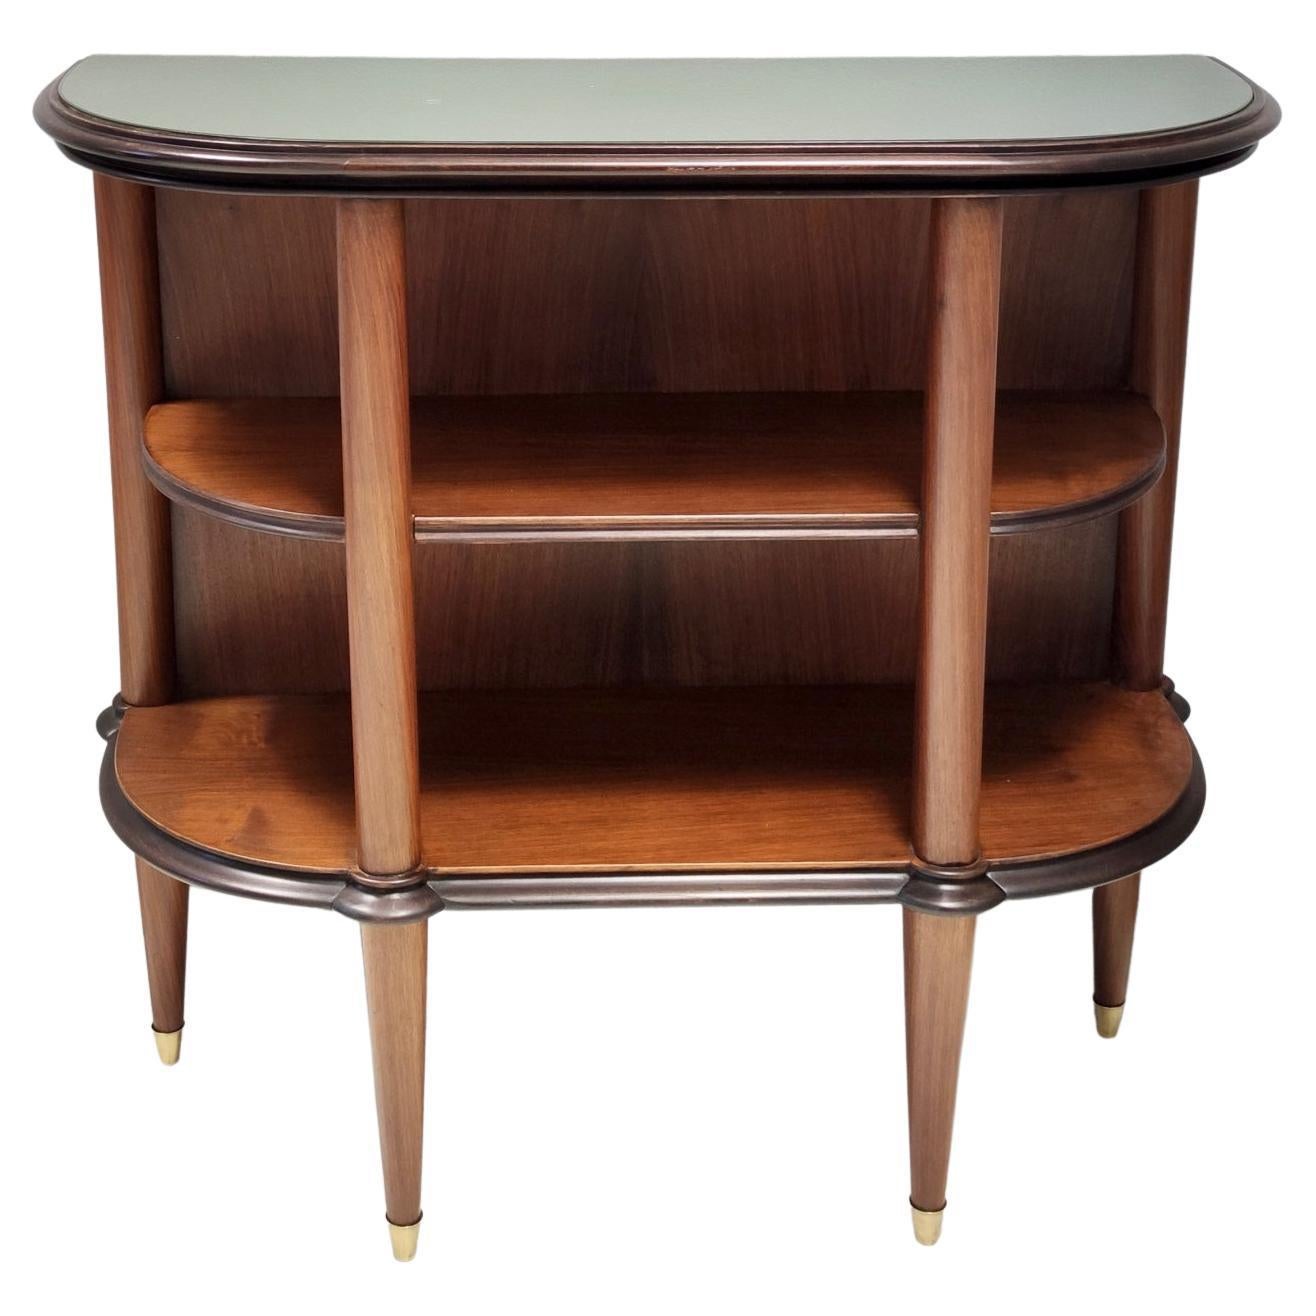 Walnut Console Table with a Light Green Glass Top and Two Shelves, Italy